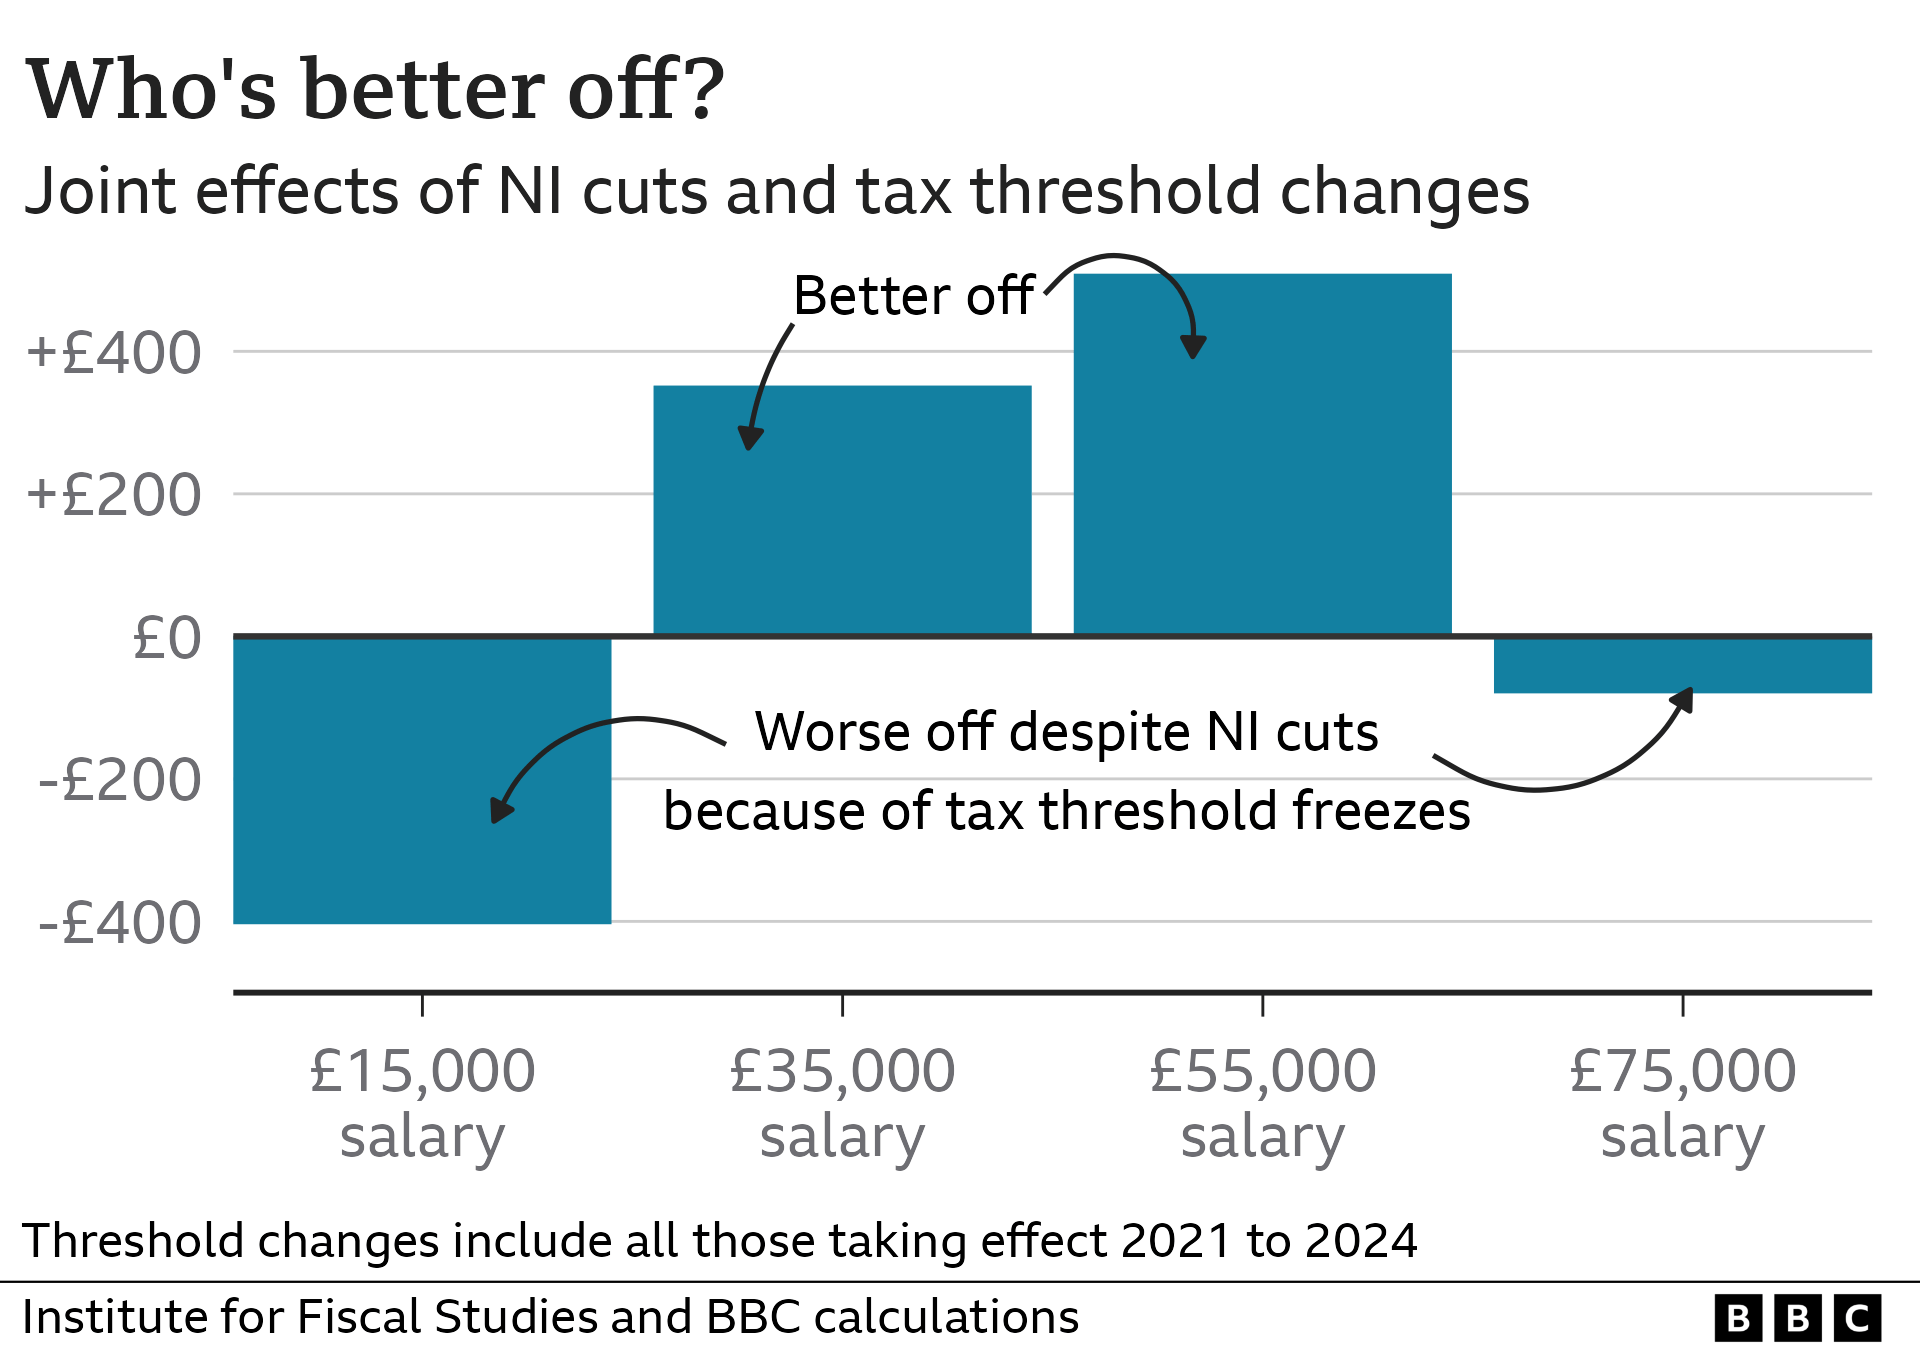 Graphic showing joint effects of NI cuts and tax threshold changes